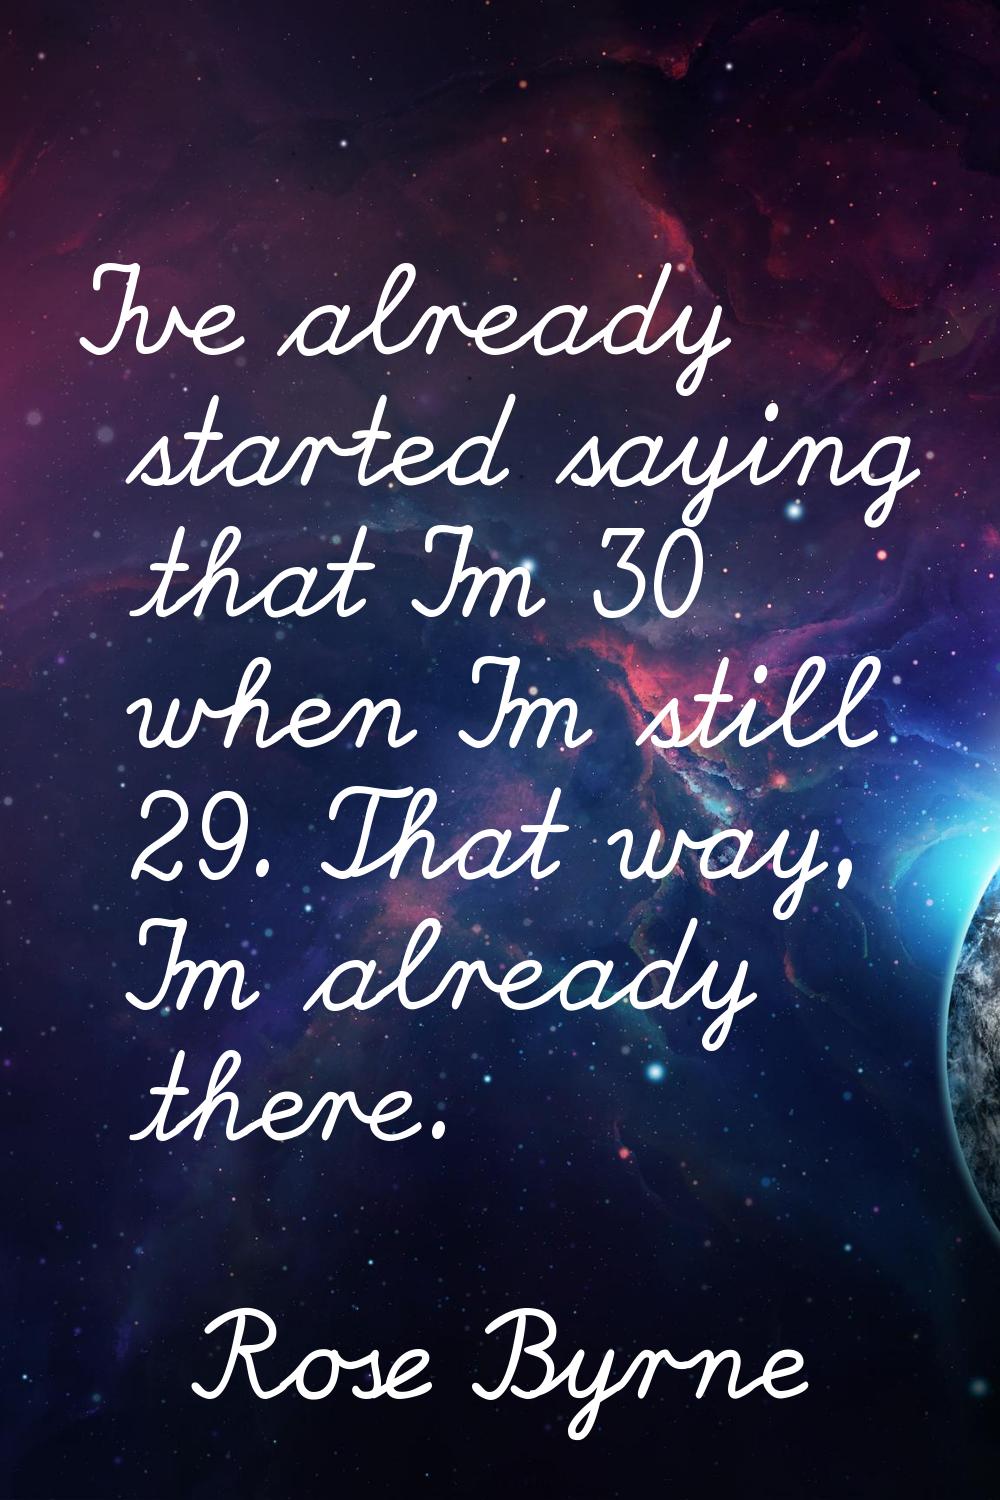 I've already started saying that I'm 30 when I'm still 29. That way, I'm already there.